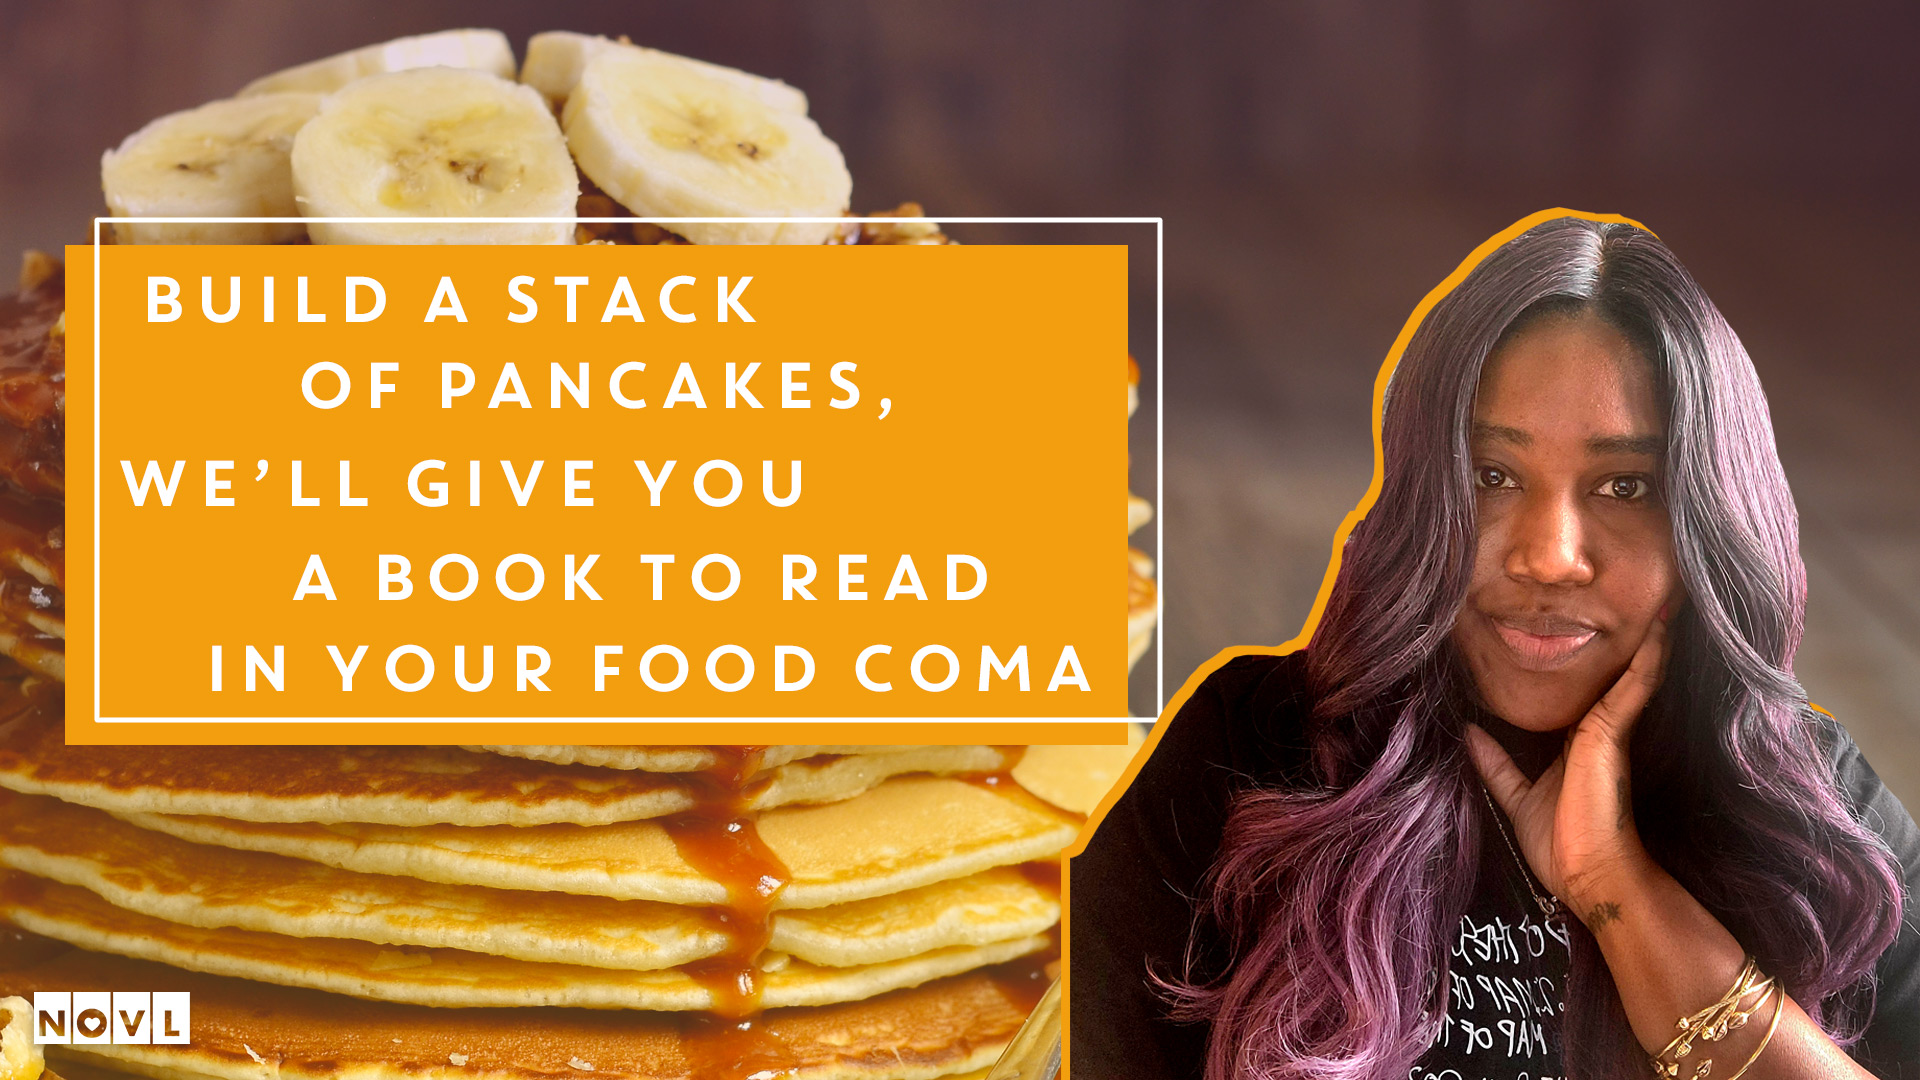 The NOVL Blog, Featured Image for Article: Build a Stack of Pancakes, We'll Give You a Book to Read in Your Food Coma